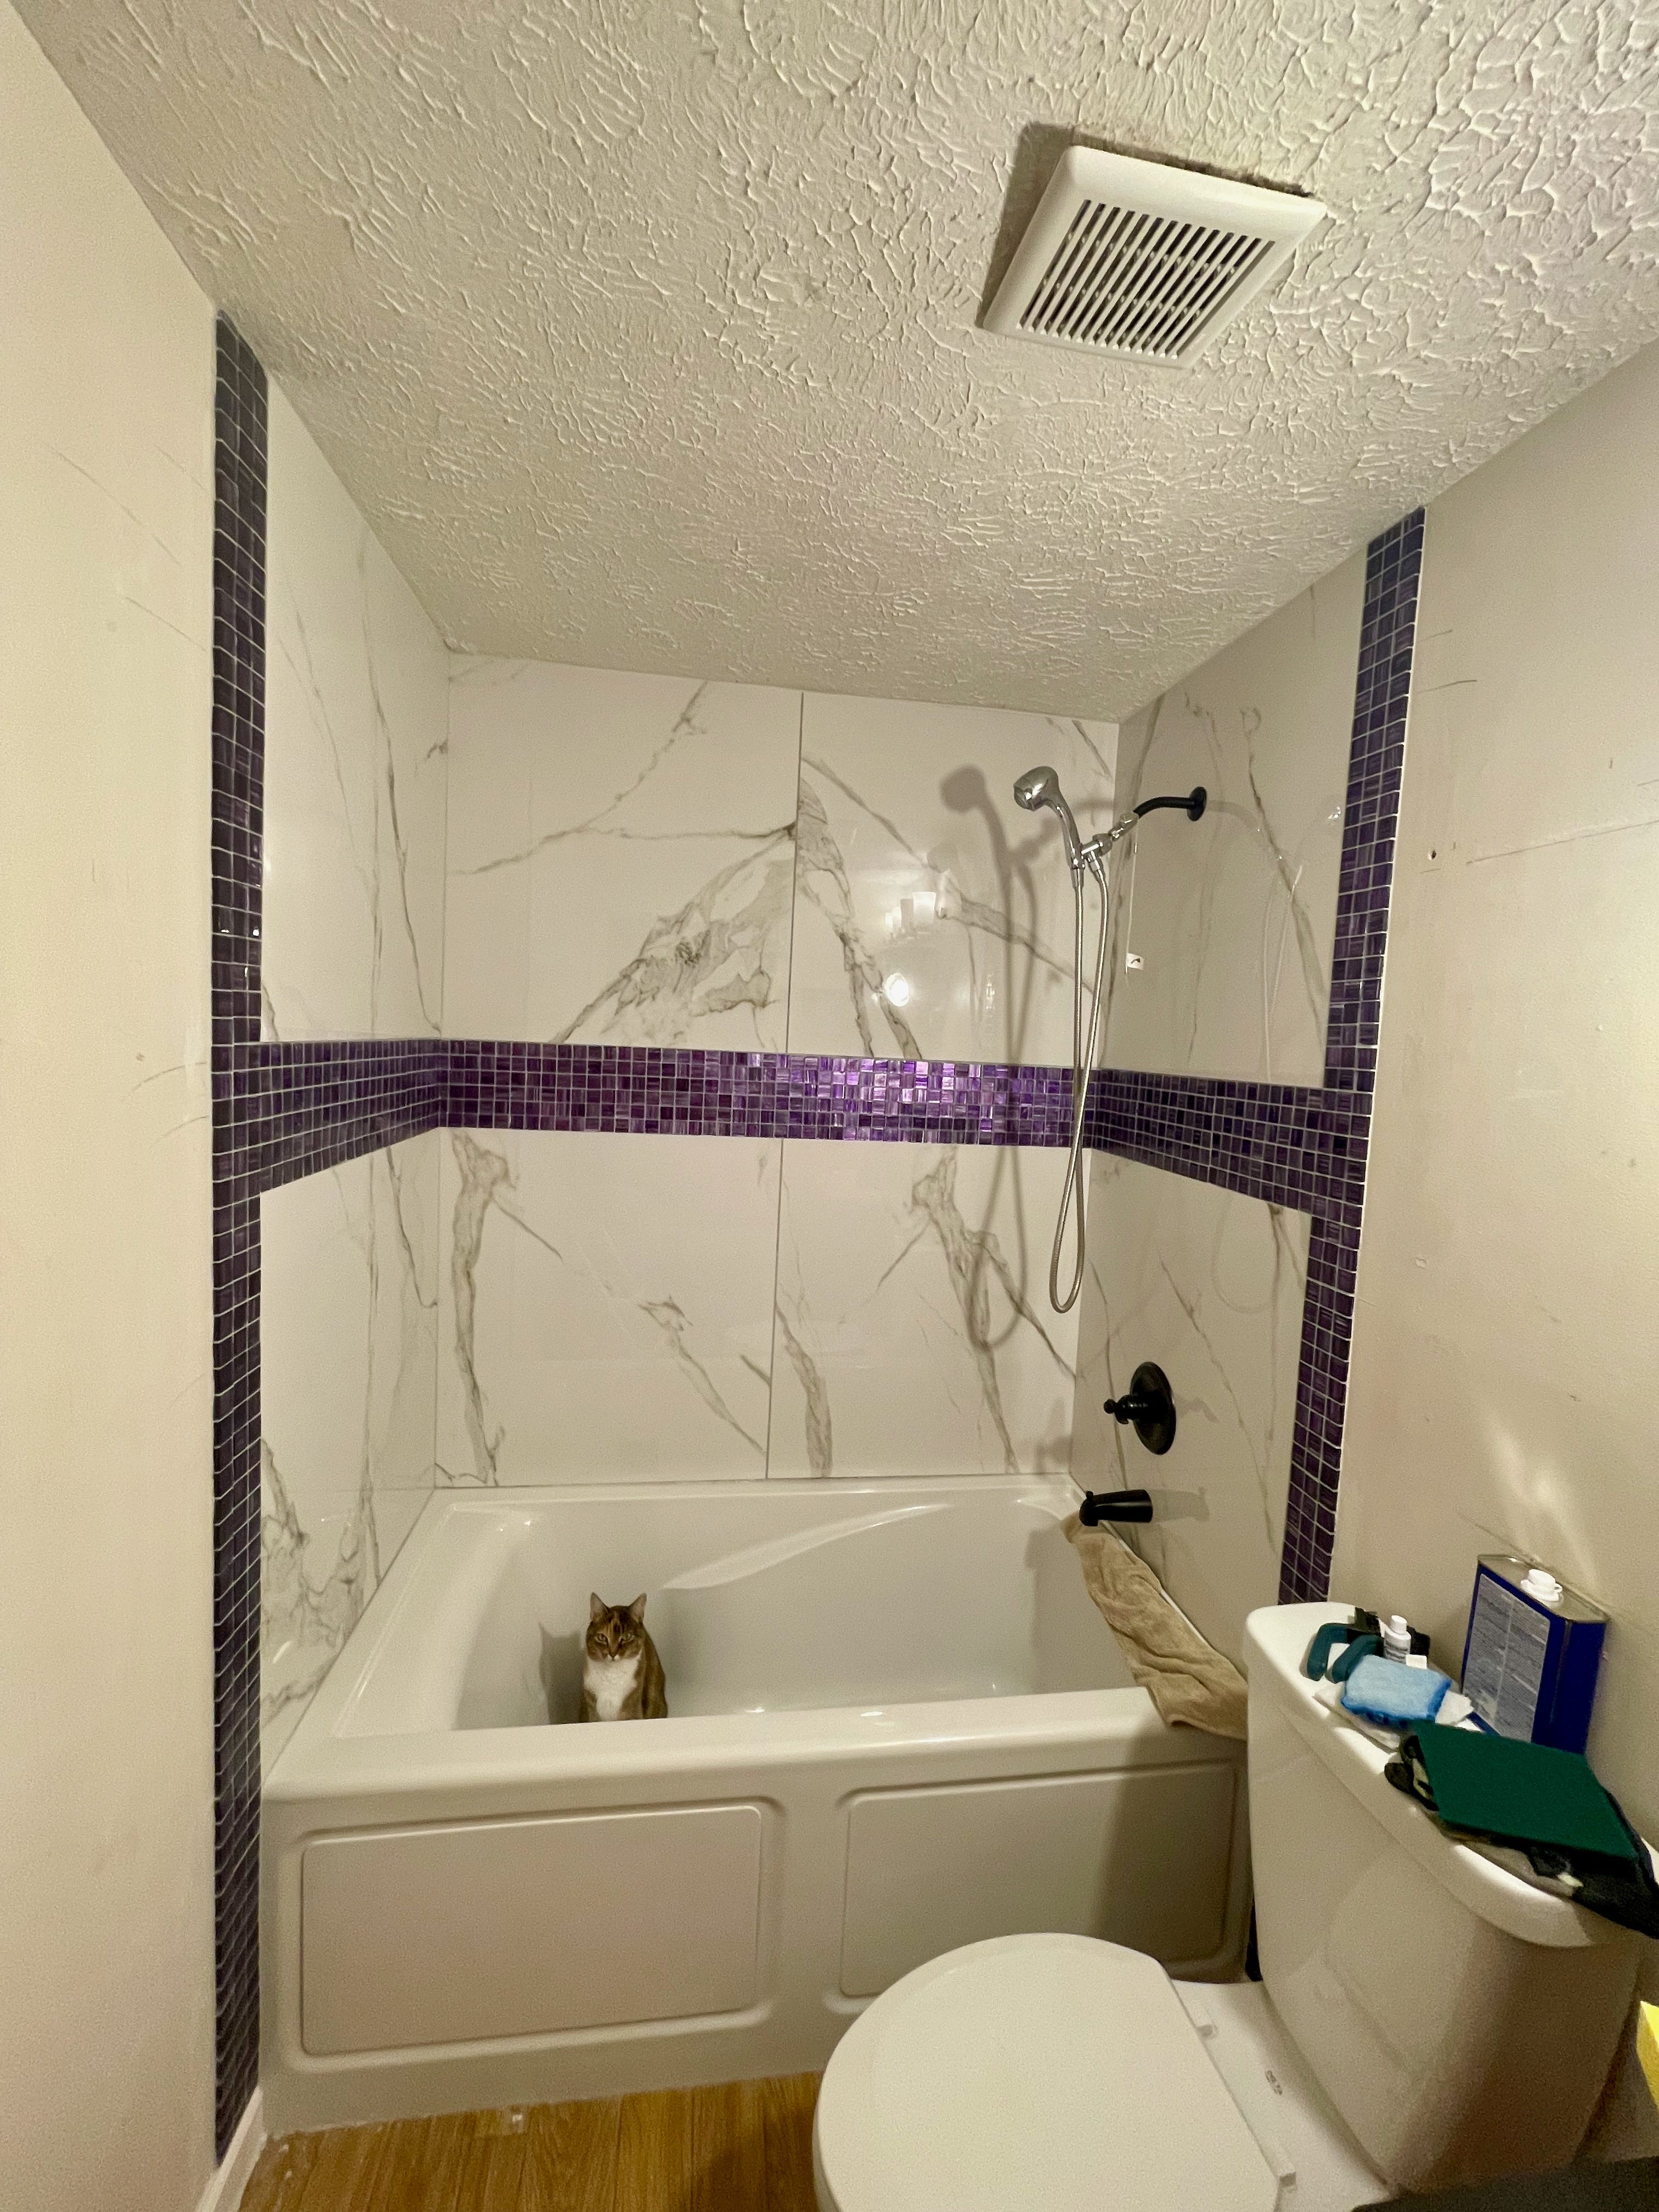 A photo of my new bathtub and shower. The tub is white and square-ish shaped, with large white and grey marble effect tiling on the walls. In the centre of the wall there is a strip of smaller purple shimmery tiling that end in vertical strips at the edges of the tub. The taps are black and Callie sits in the tub looking out from her new hideout.